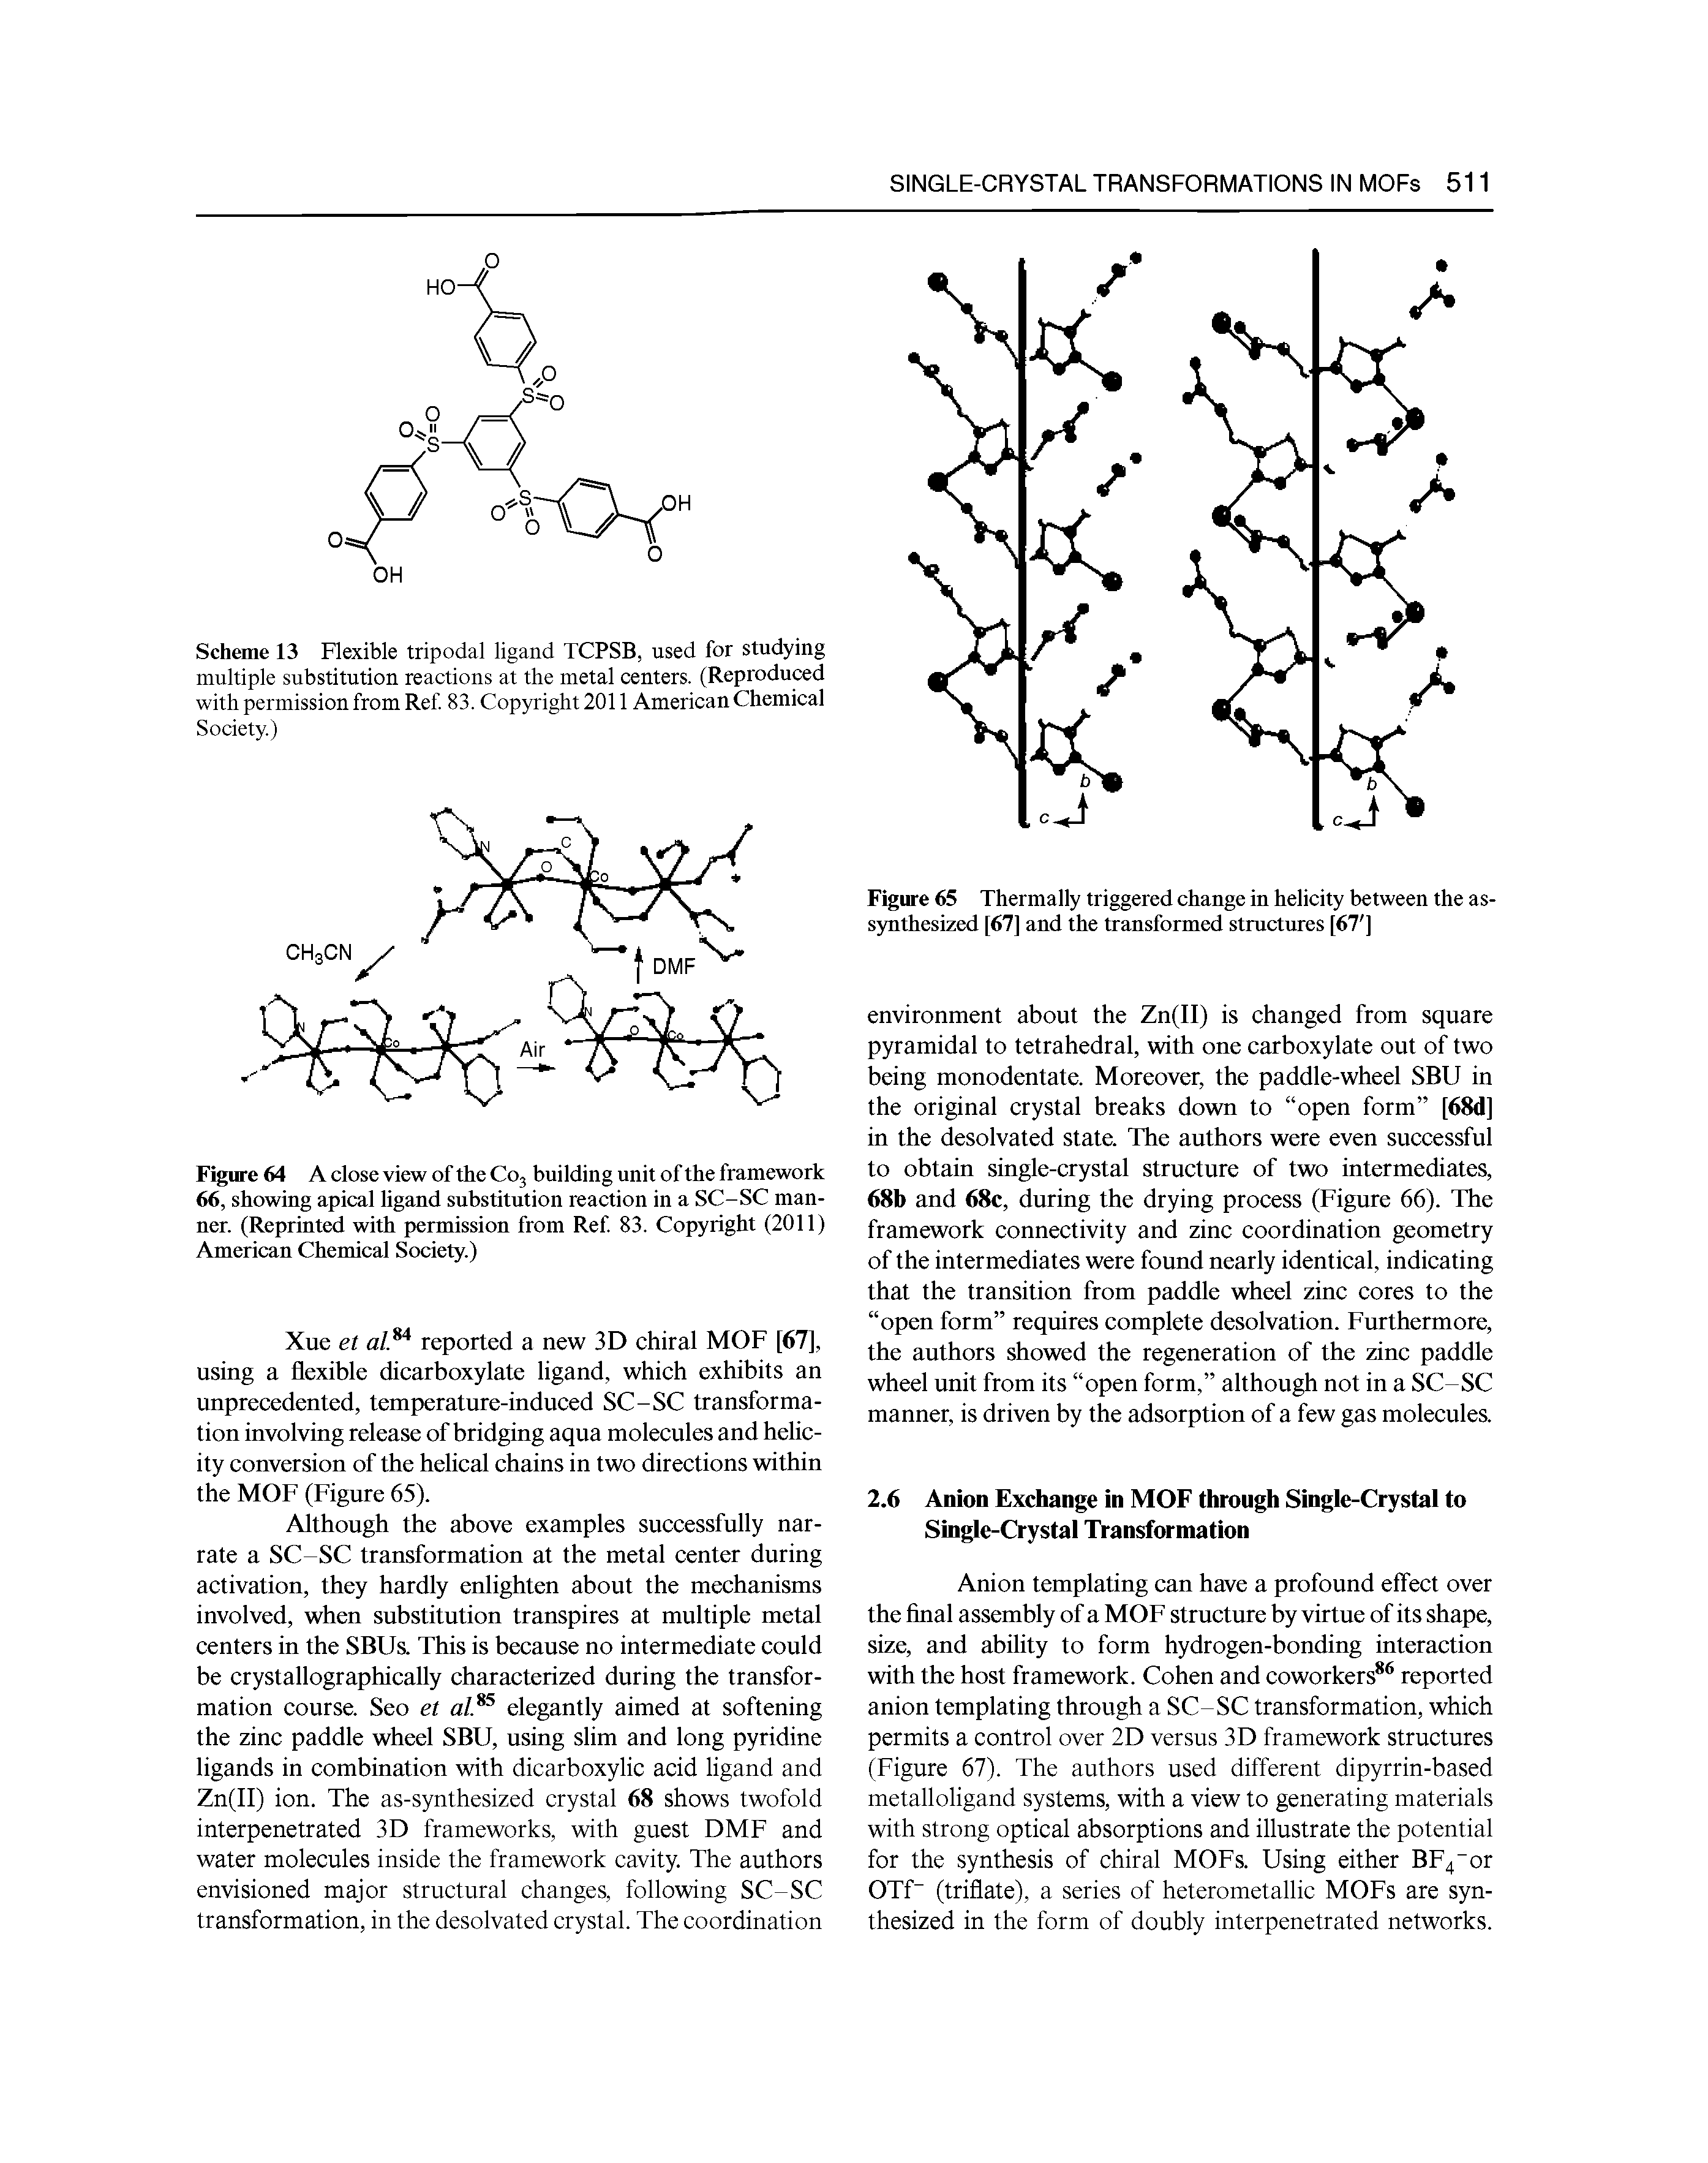 Scheme 13 Flexible tripodal ligand TCPSB, used for studying multiple substitution reactions at the metal centers. (Reproduced with permission from Ref 83. Copyright 2011 American Chemical Society.)...